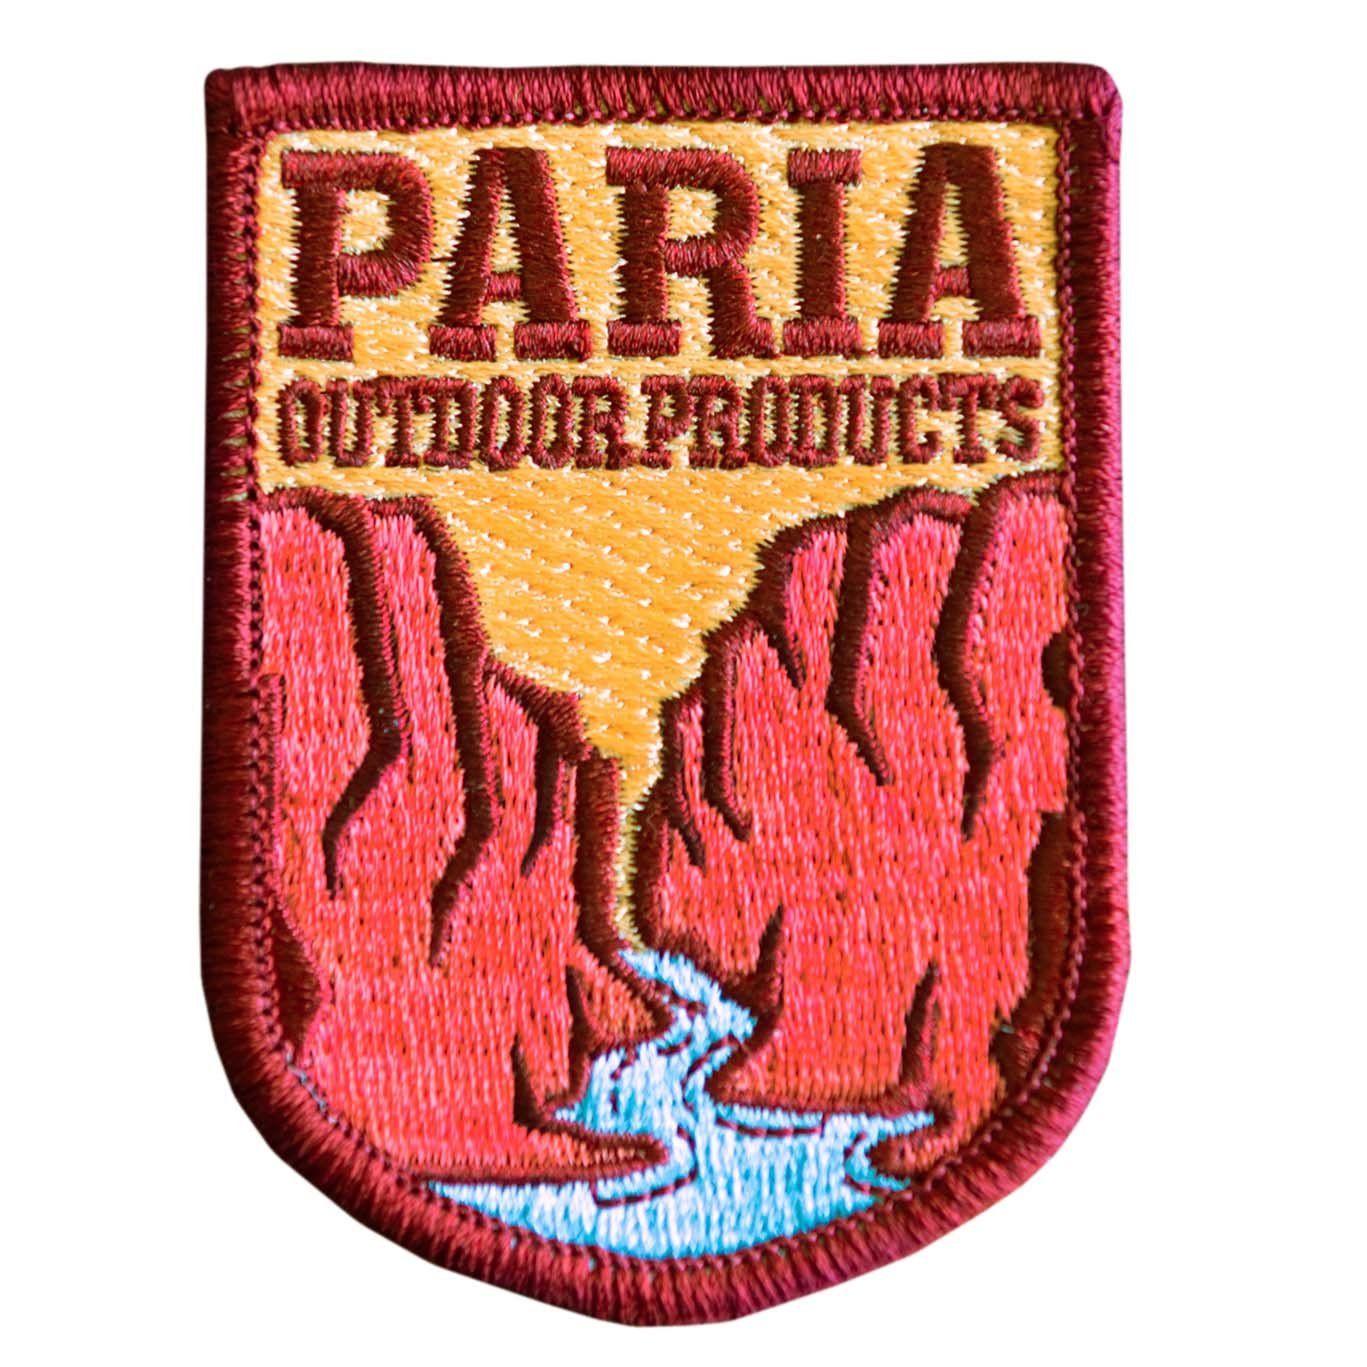 Outdoor Products Logo - Paria Outdoor Products Logo Patches